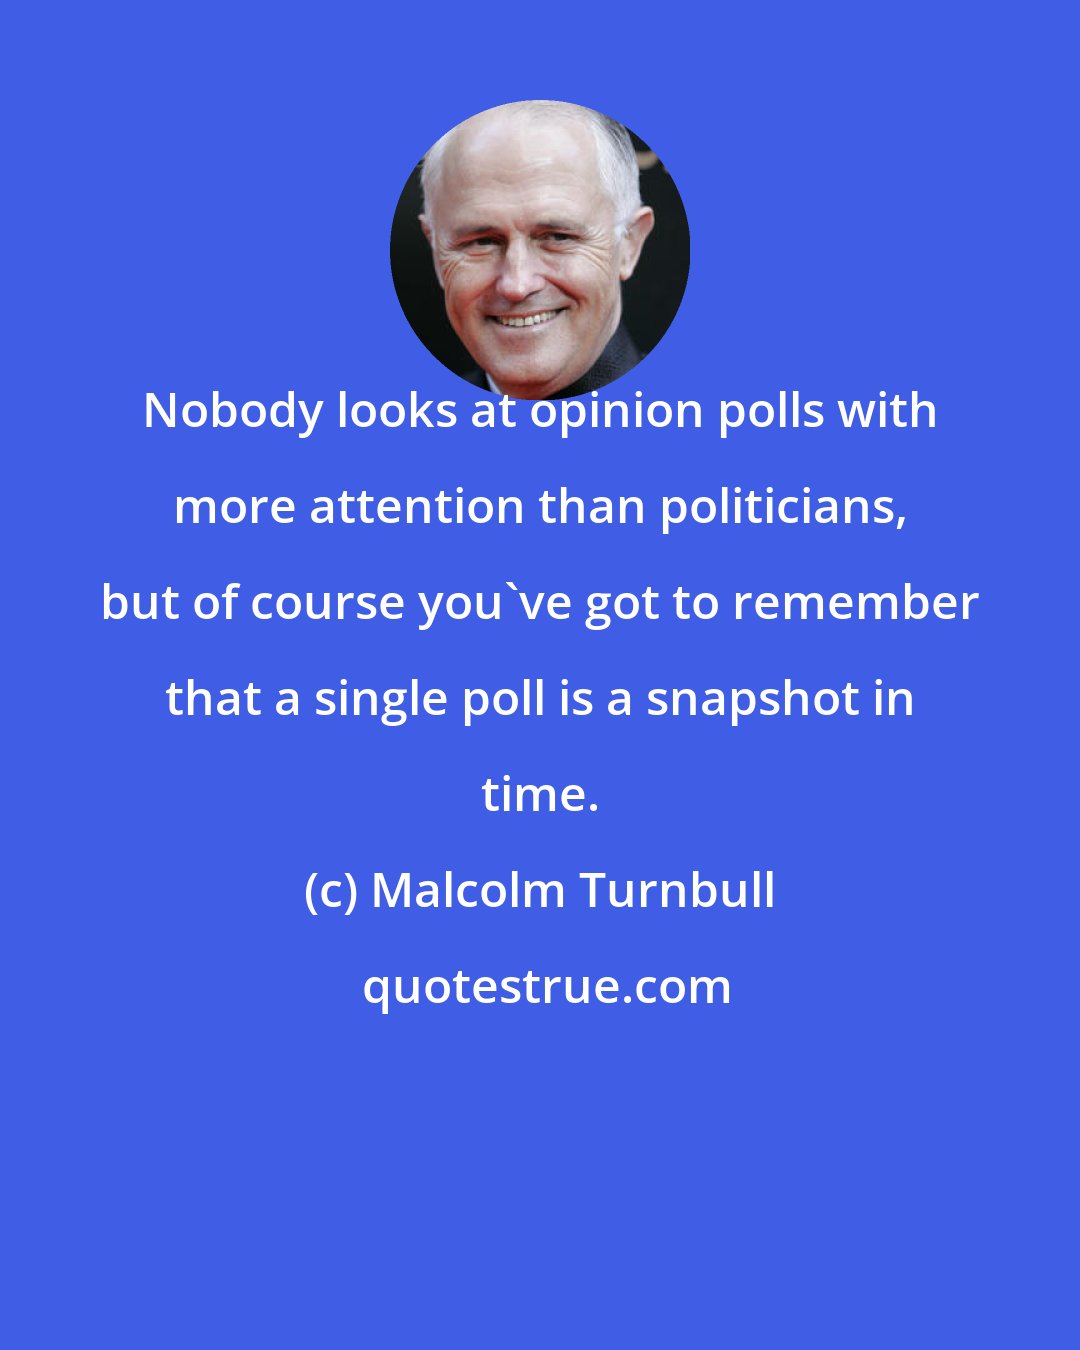 Malcolm Turnbull: Nobody looks at opinion polls with more attention than politicians, but of course you've got to remember that a single poll is a snapshot in time.